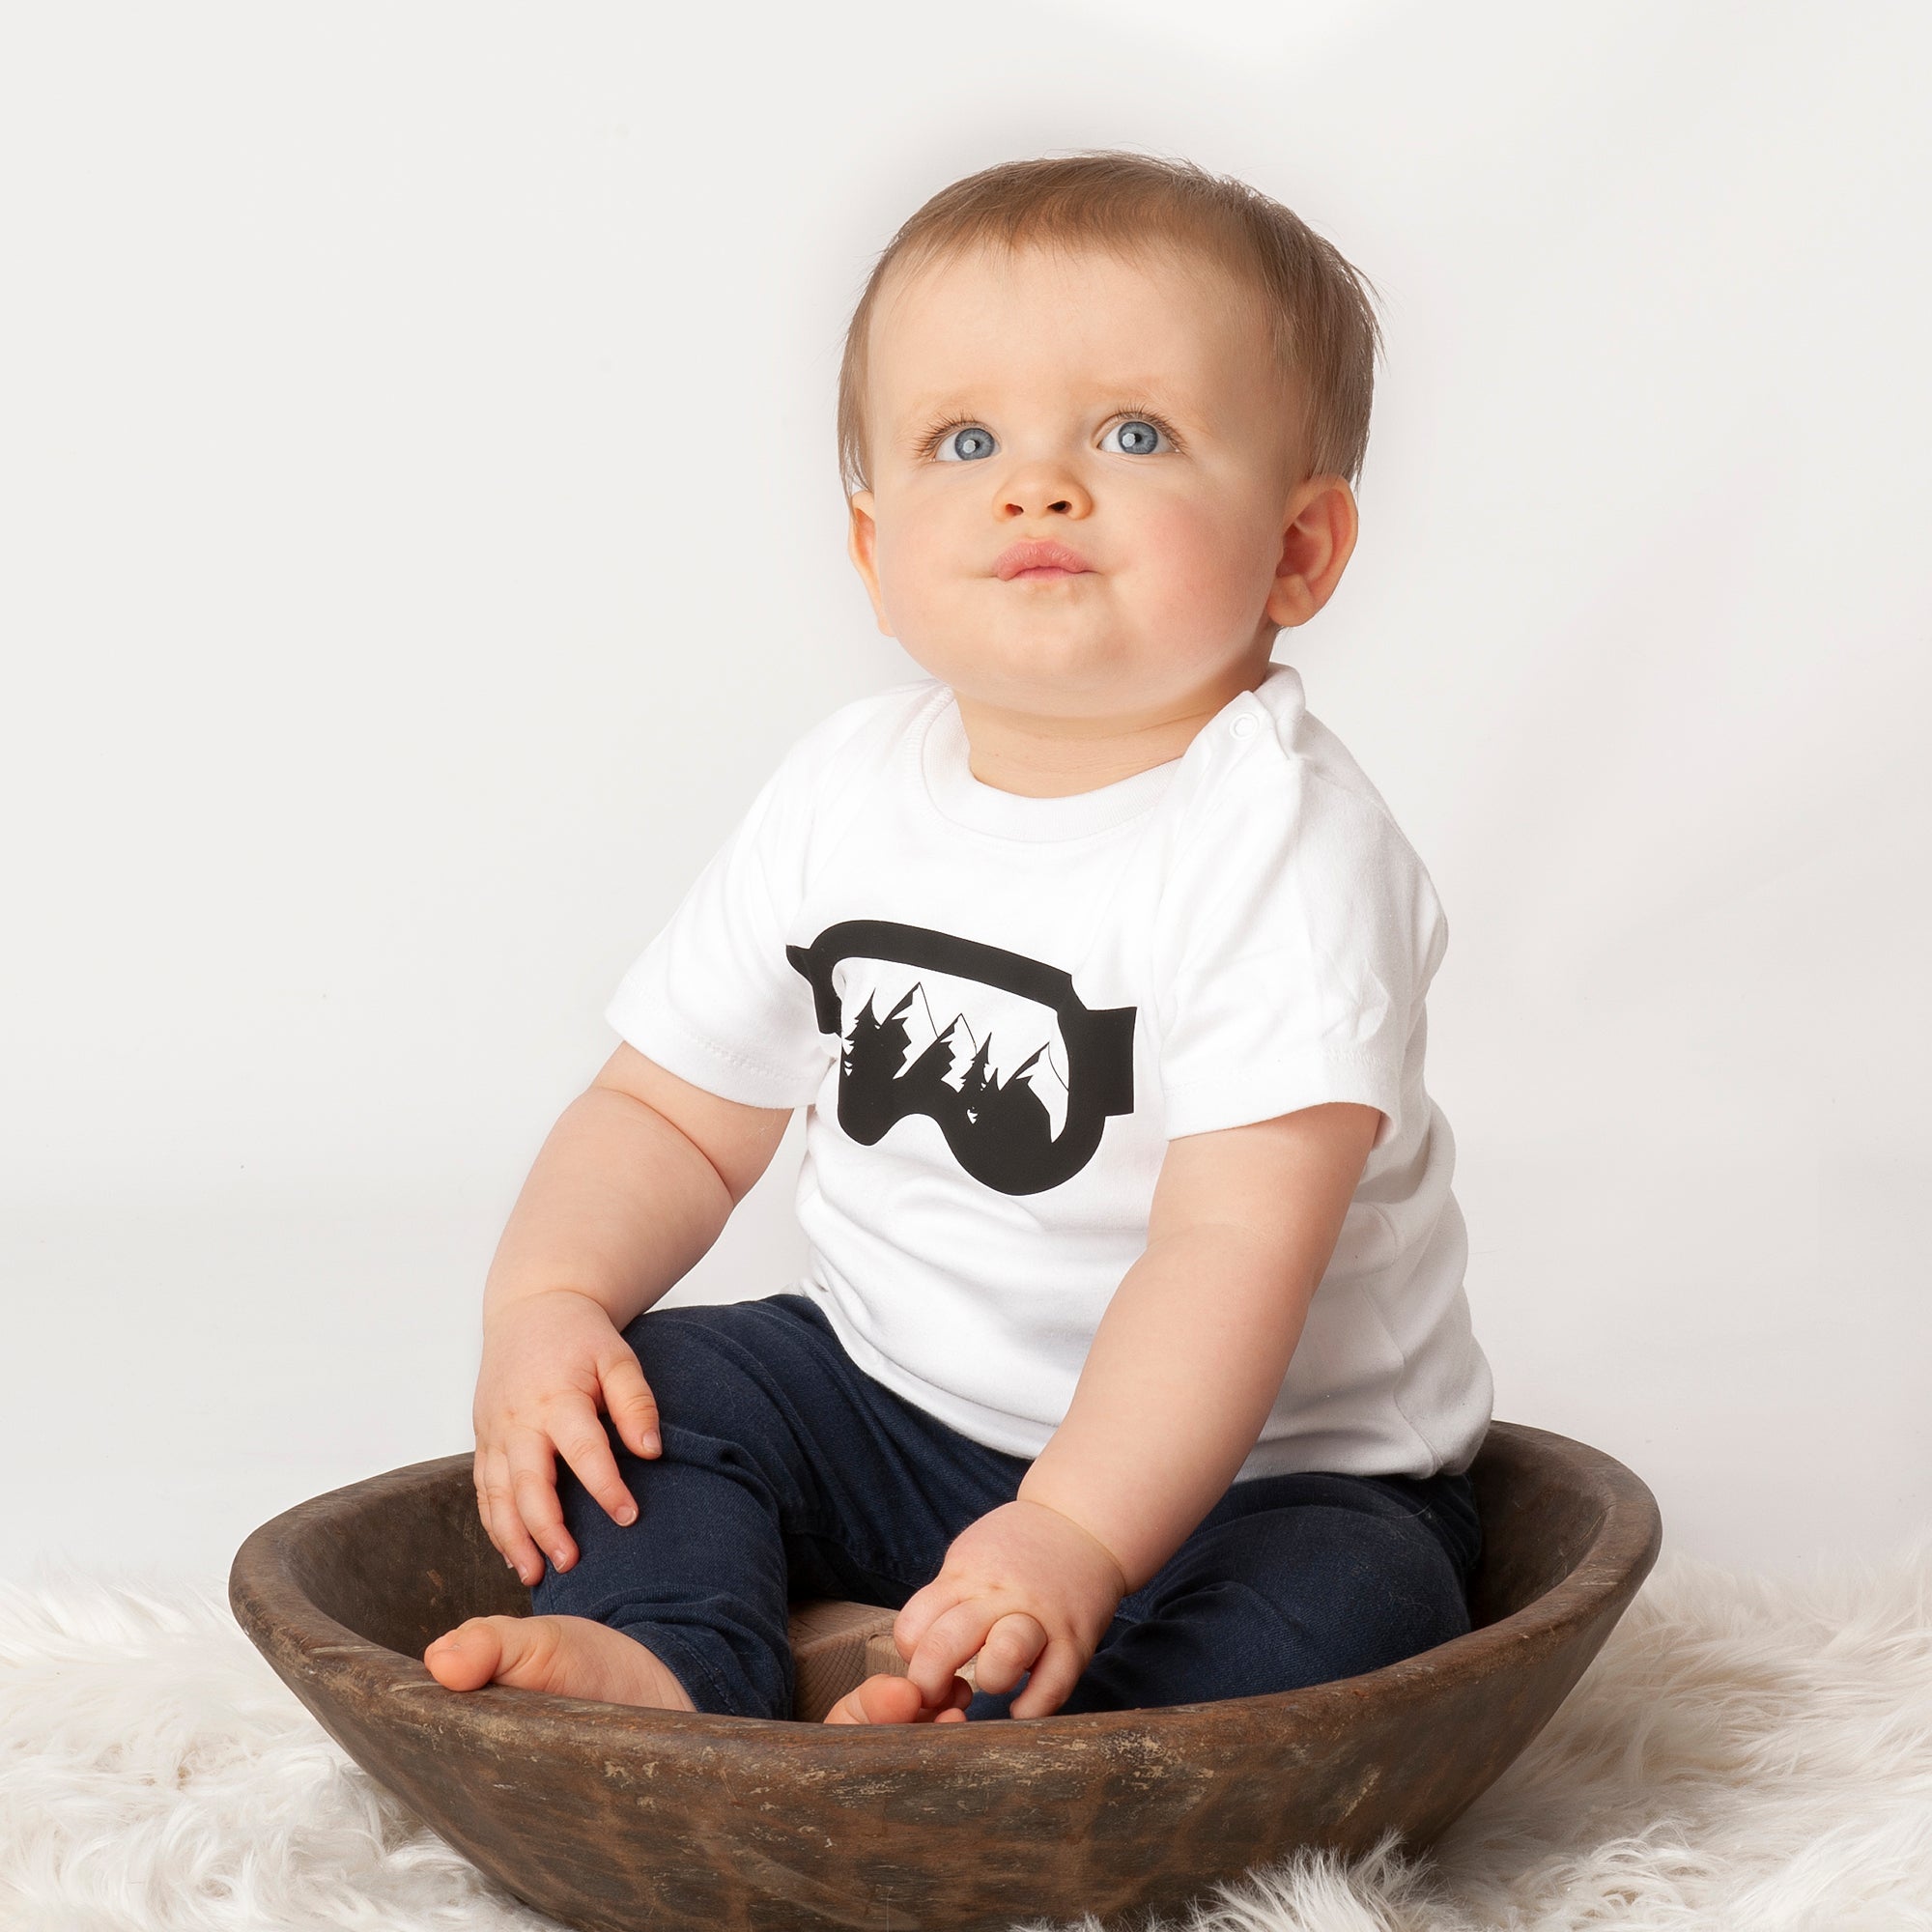 Little boy wearing white shirt with ski goggles print by KMLeon sitting in brown dish.